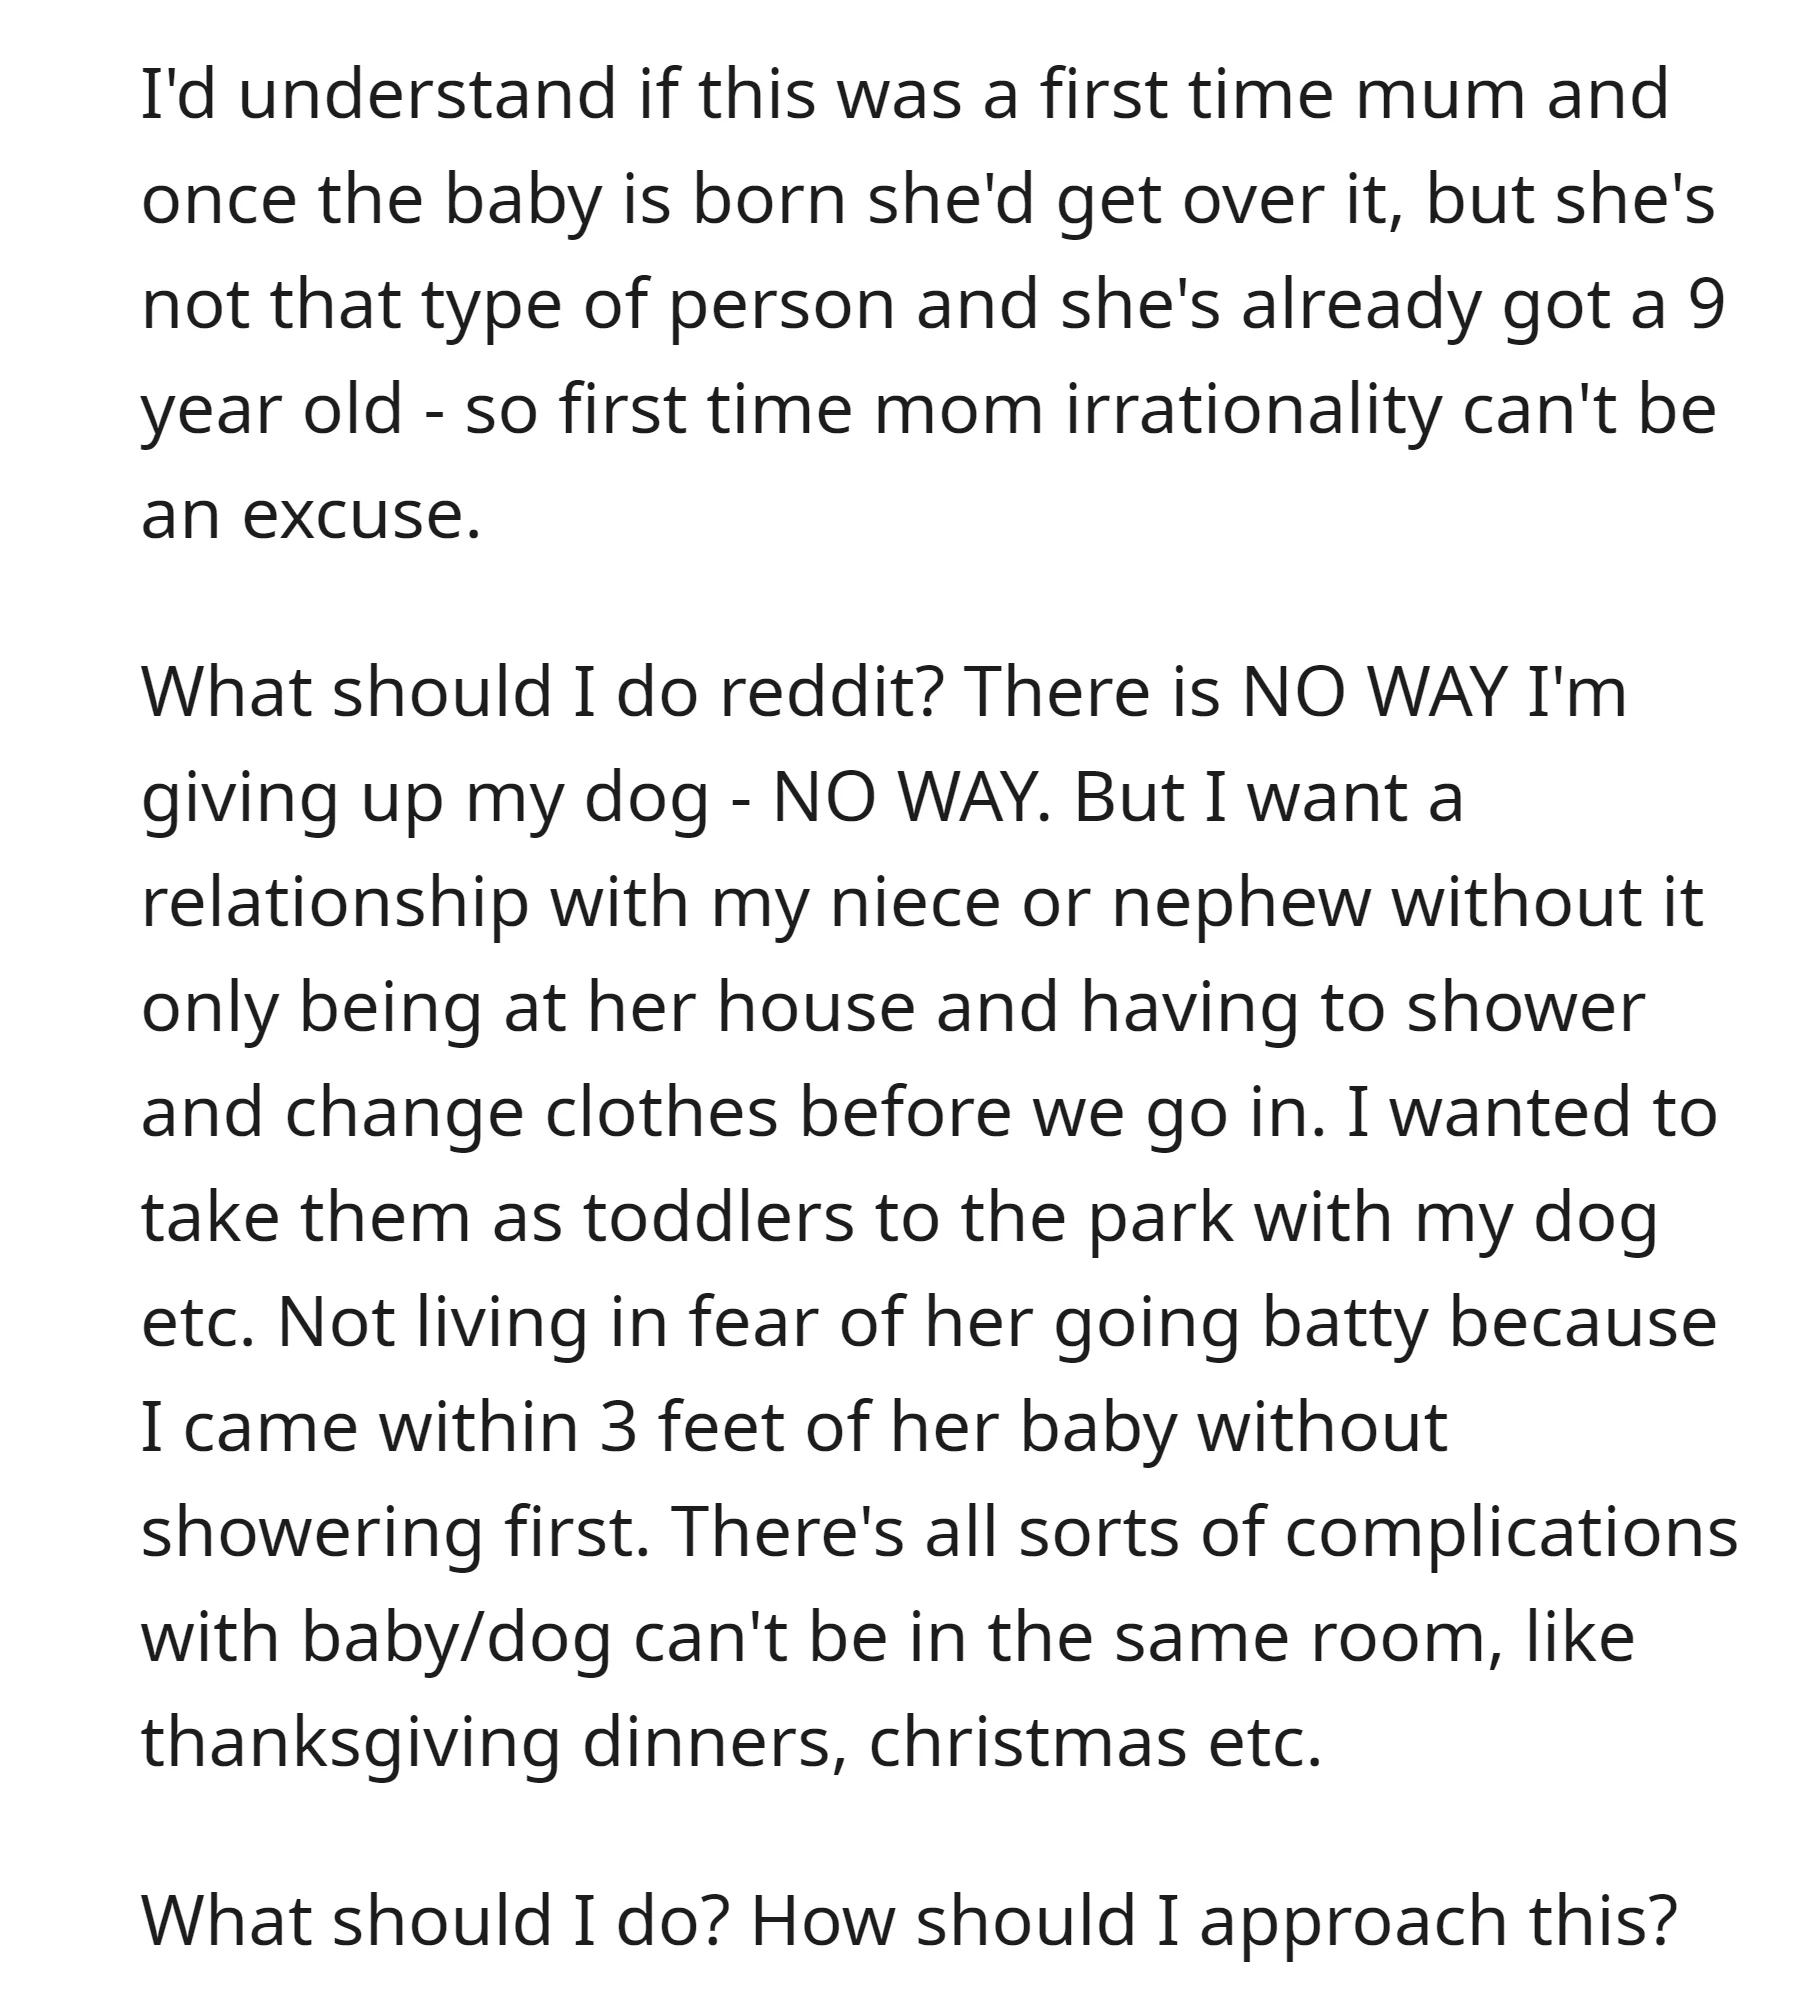 OP now doesn't know how to maintain a relationship with her niece or nephew